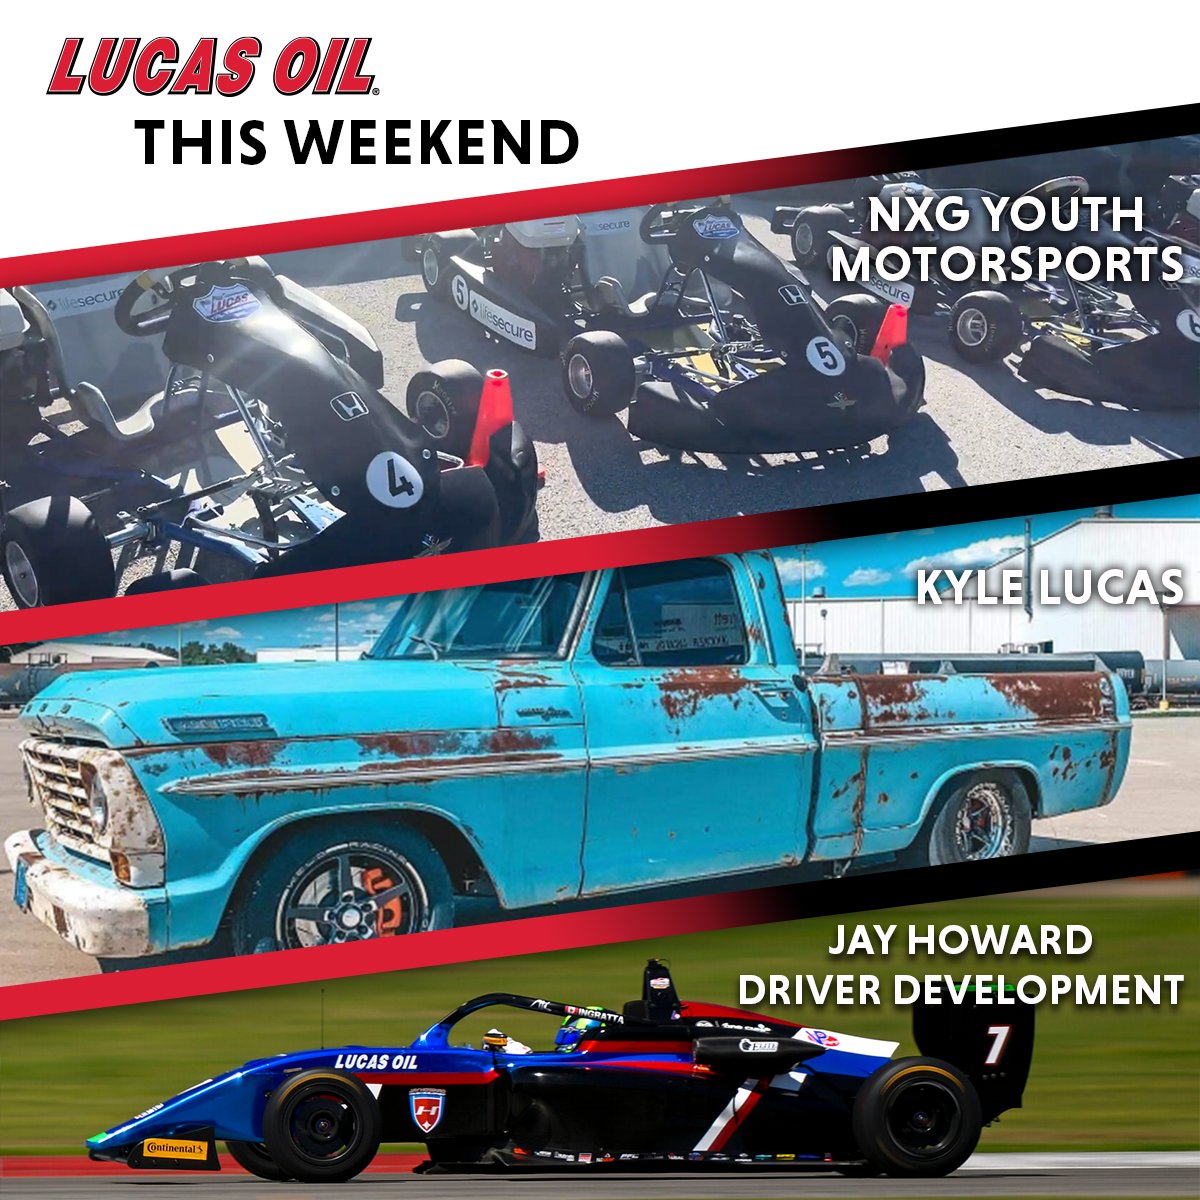 🏁 For the #IndyGP weekend at @IMS, the @nexgeneracers are racing in the museum lot, and @FollowJHDD drivers will be in the @USFProChamps events! 💪 Kyle Lucas will be representing the #LucasAlliance at @OVDragway with his 1967 F100 on the Kentucky drag strip! 🤩 Best of luck!